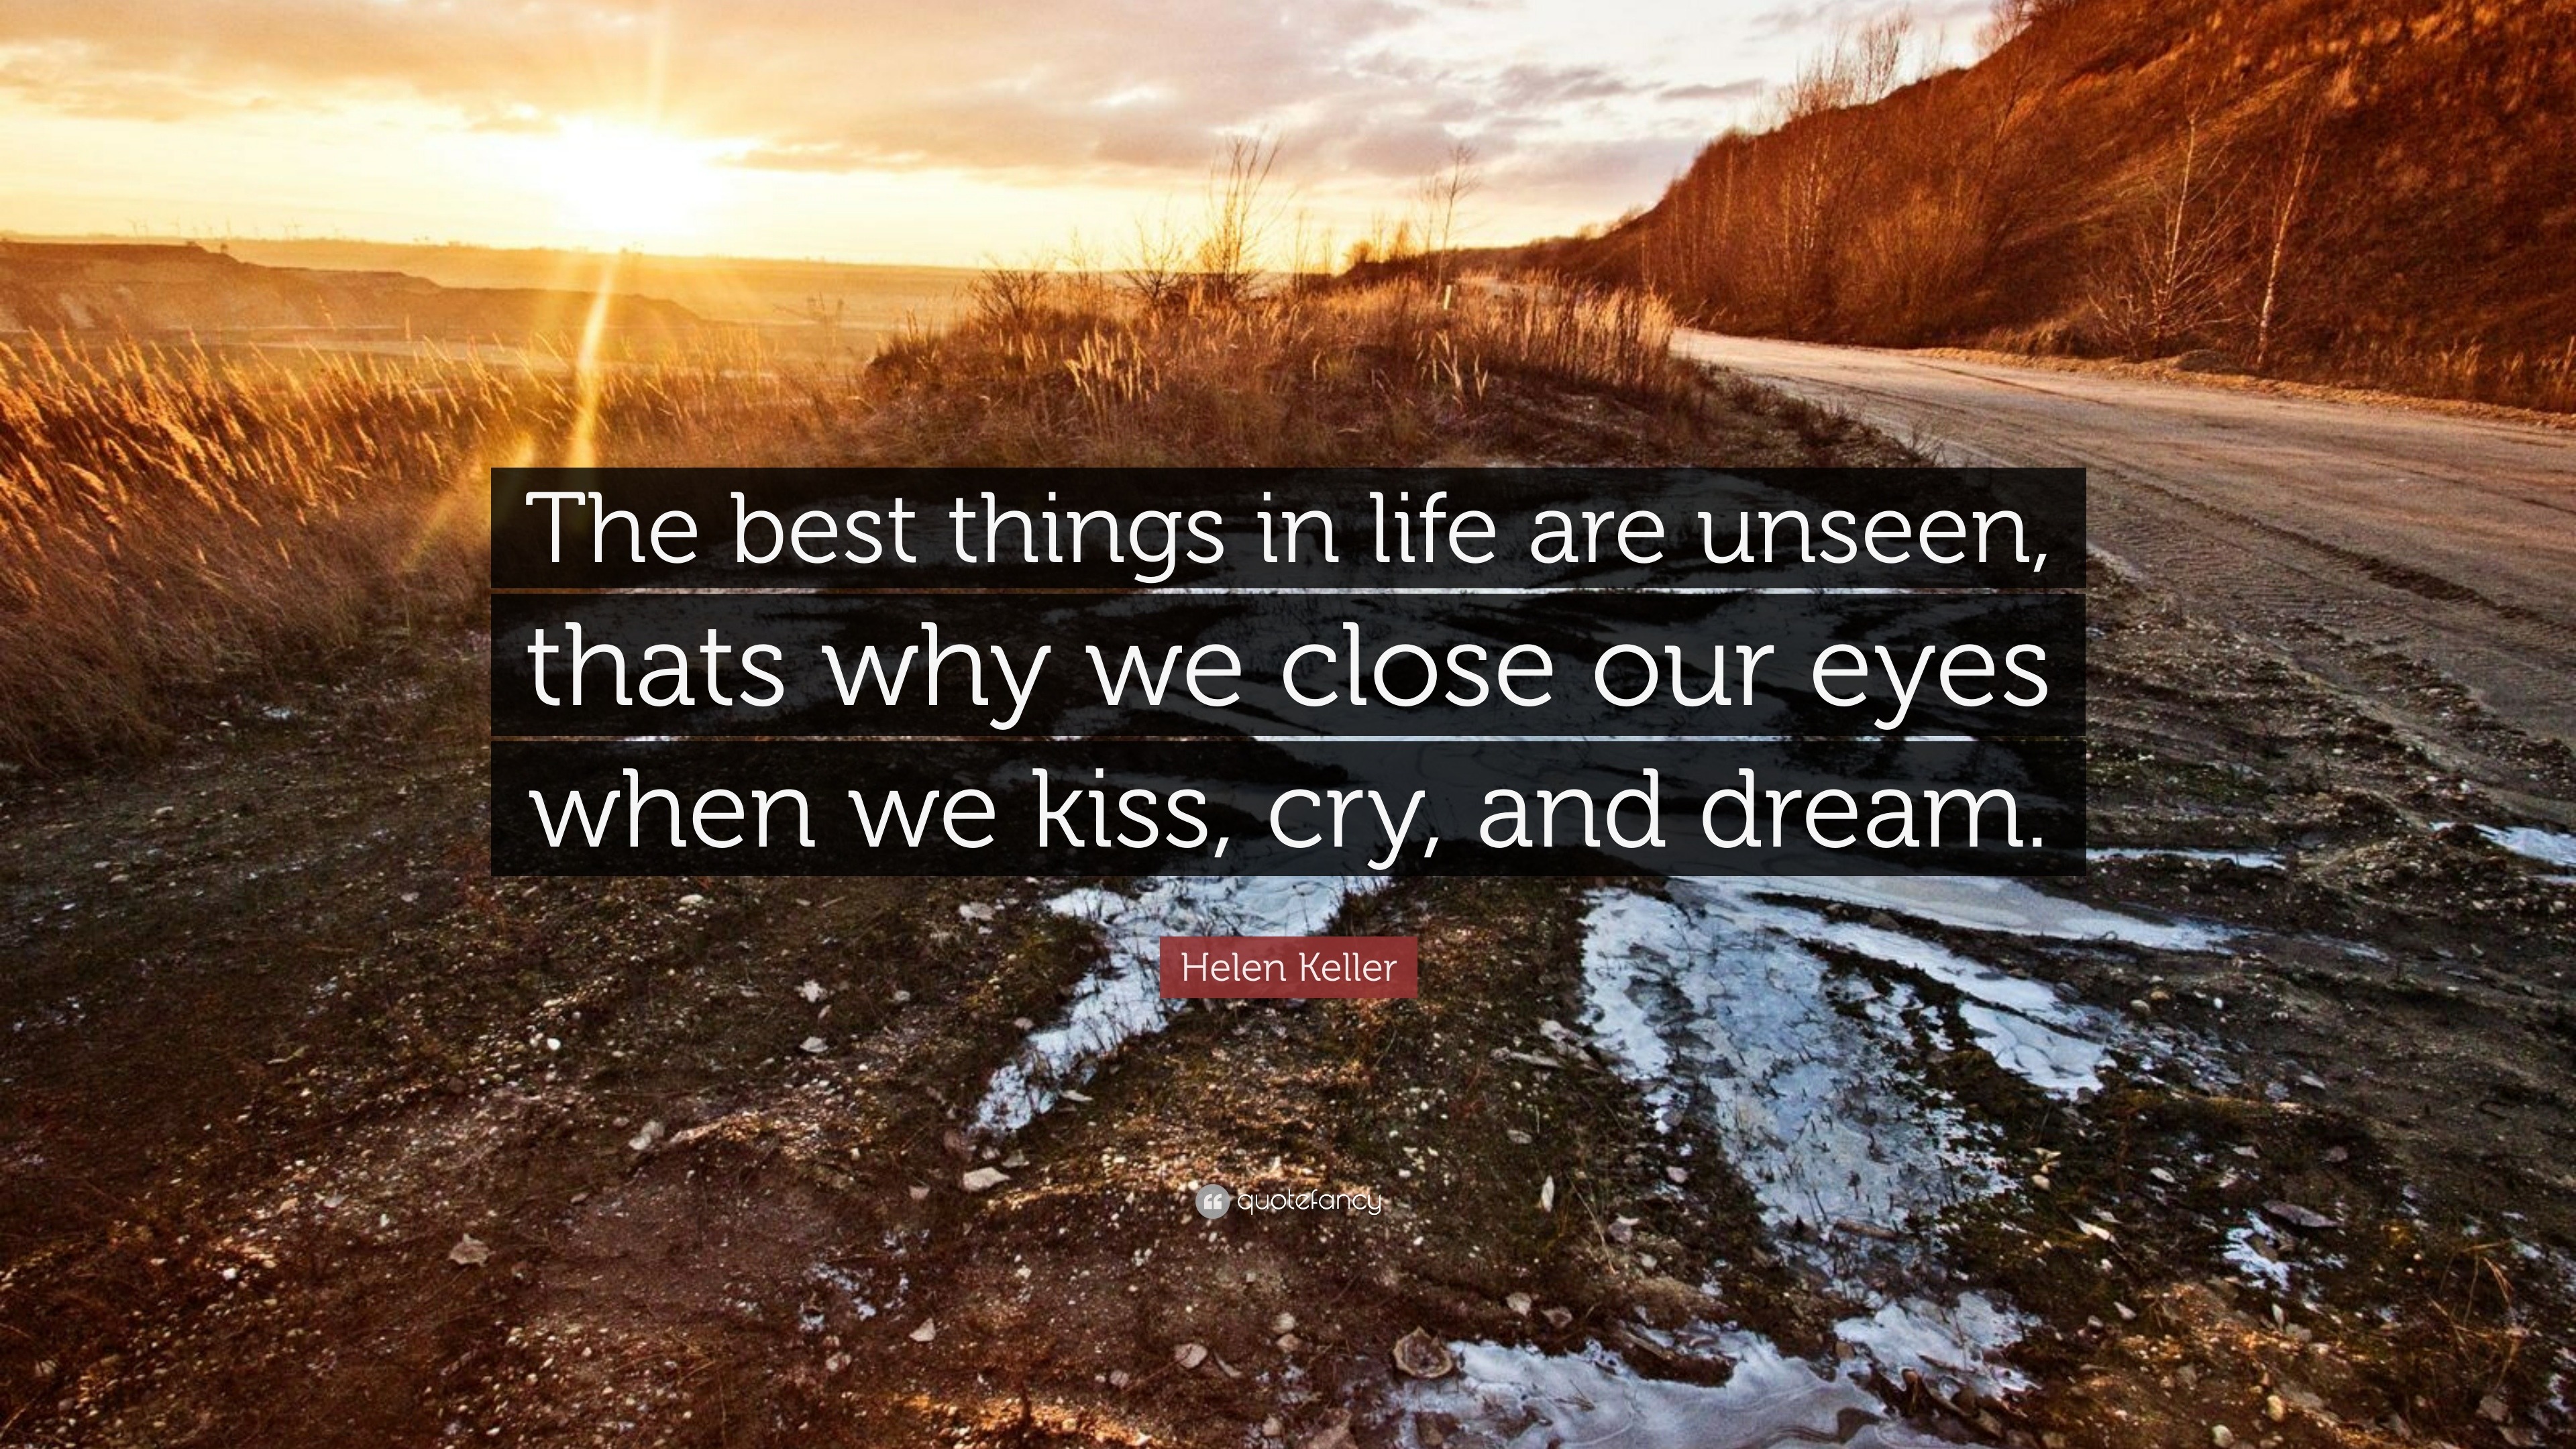 Helen Keller Quote “the Best Things In Life Are Unseen Thats Why We Close Our Eyes When We